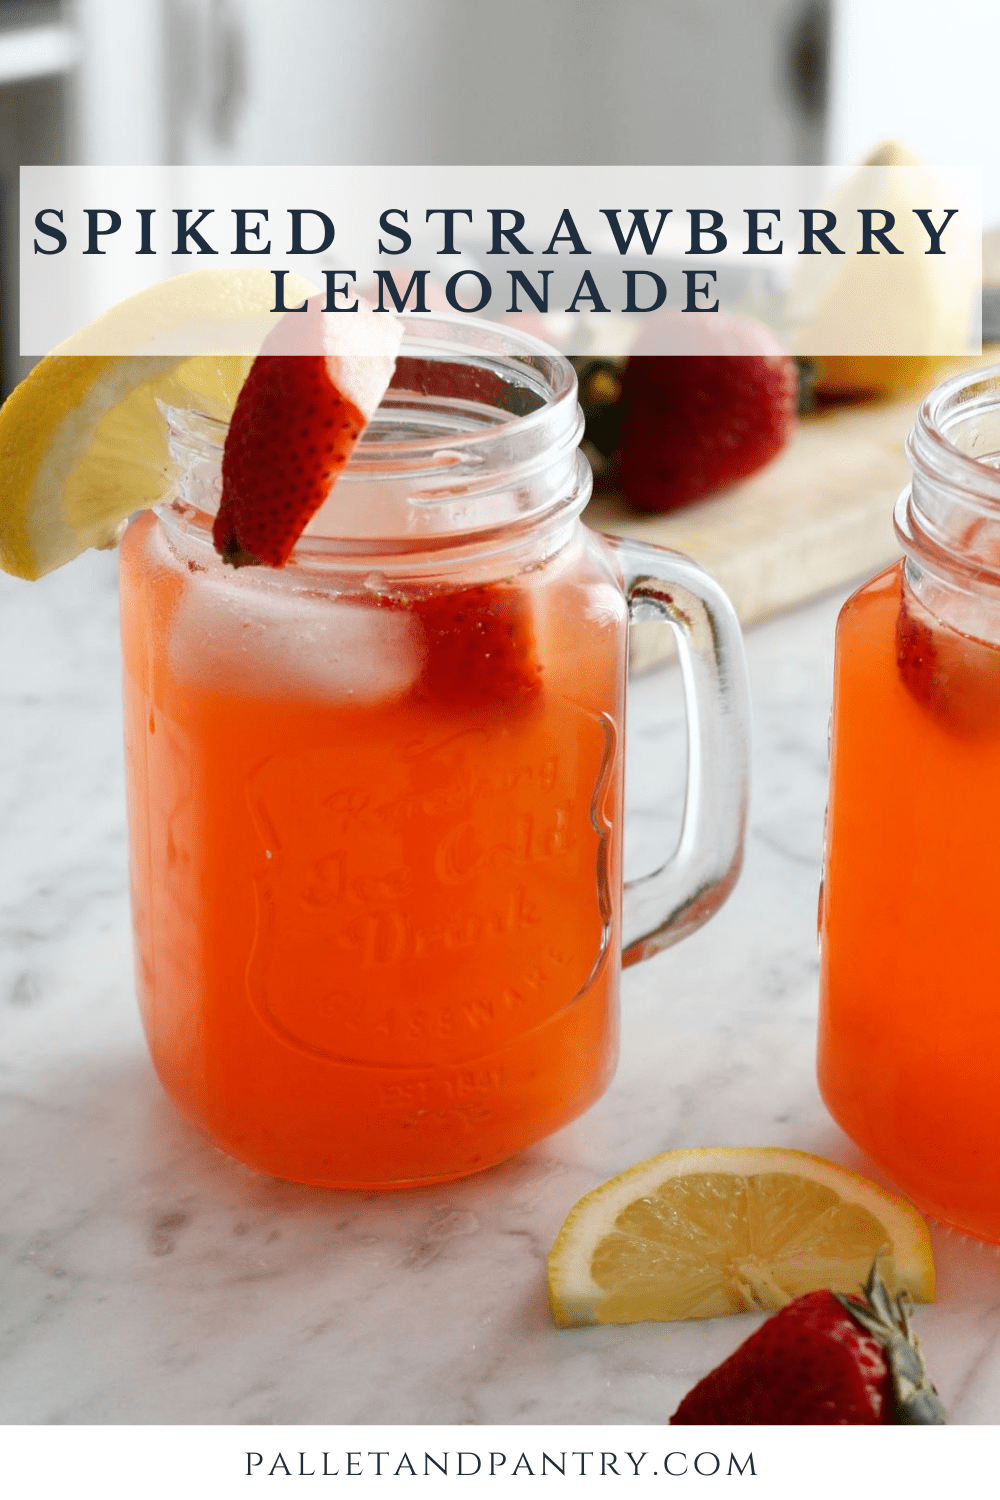 Spiked Strawberry Lemonade - Pallet and Pantry